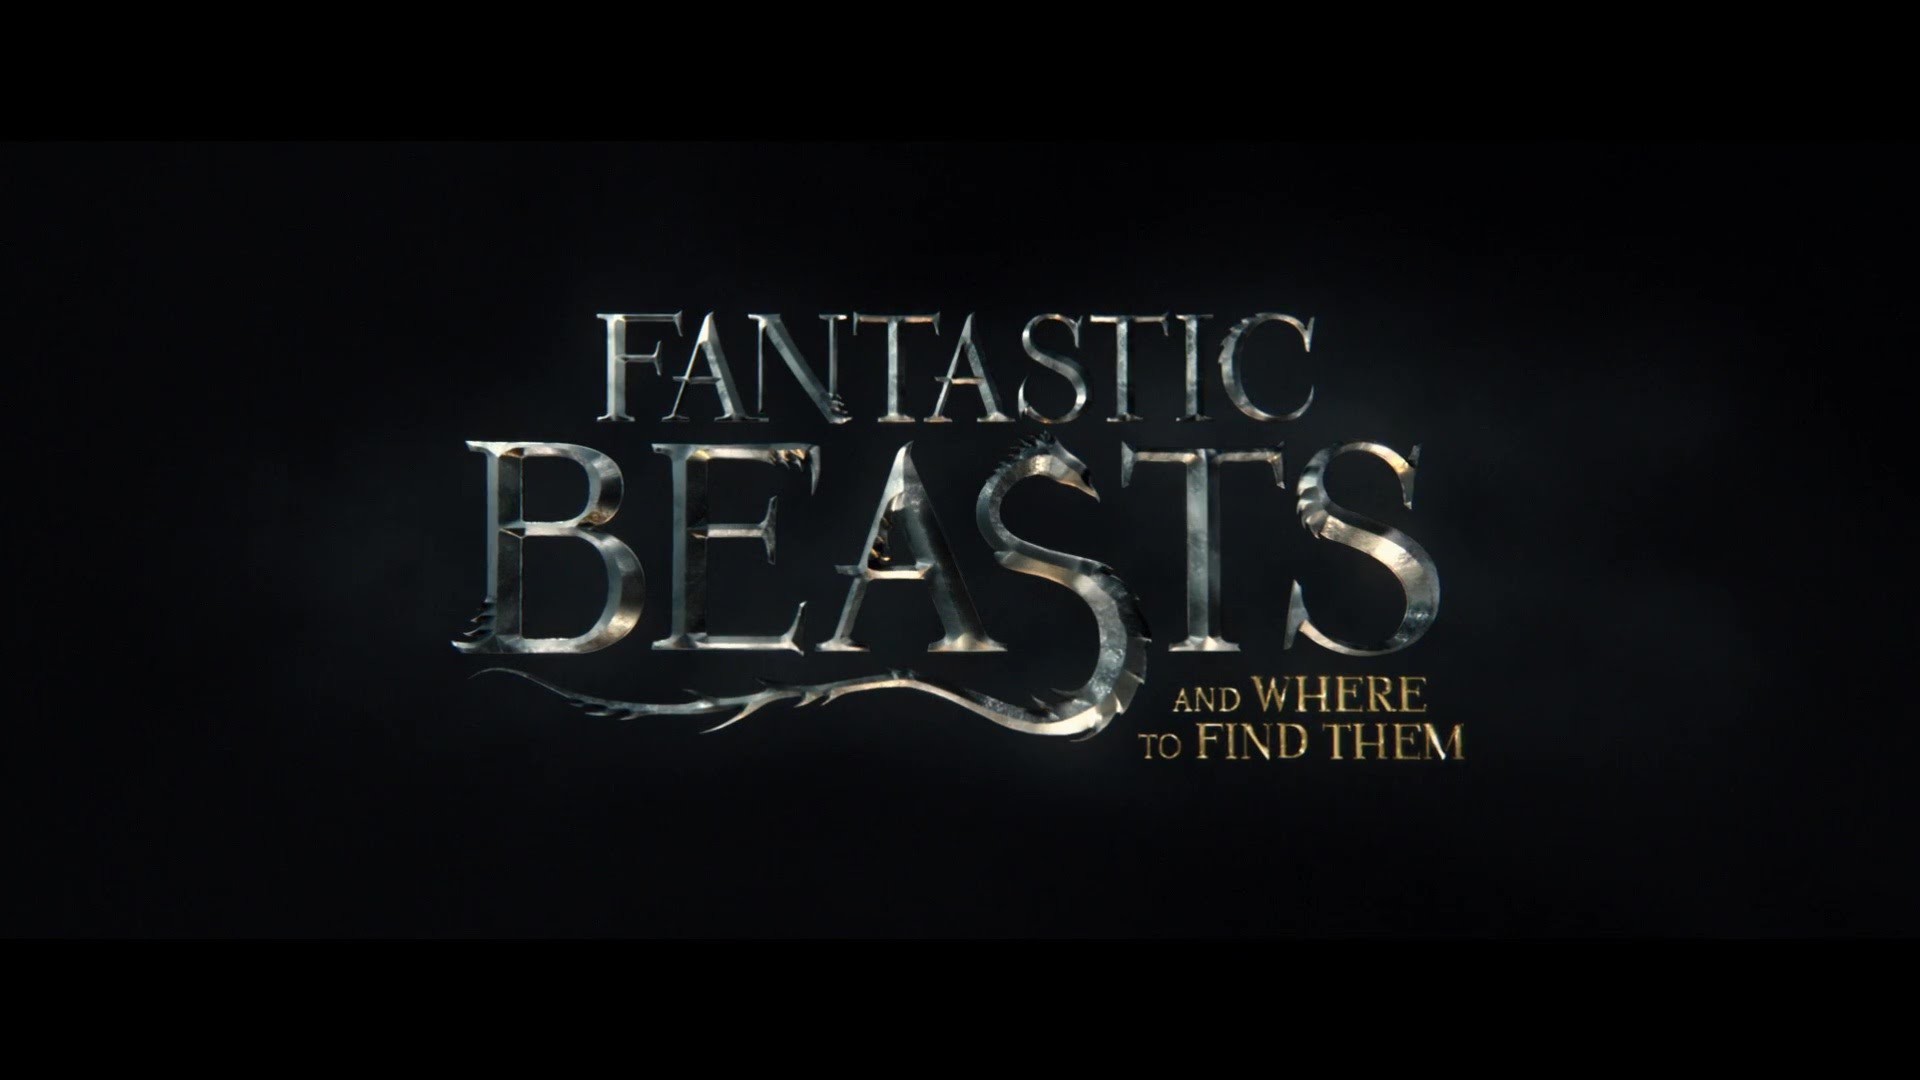 1920x1080 Fantastic Beasts and Where to Find Them Wallpaper HD 16 - 1920 X 1080